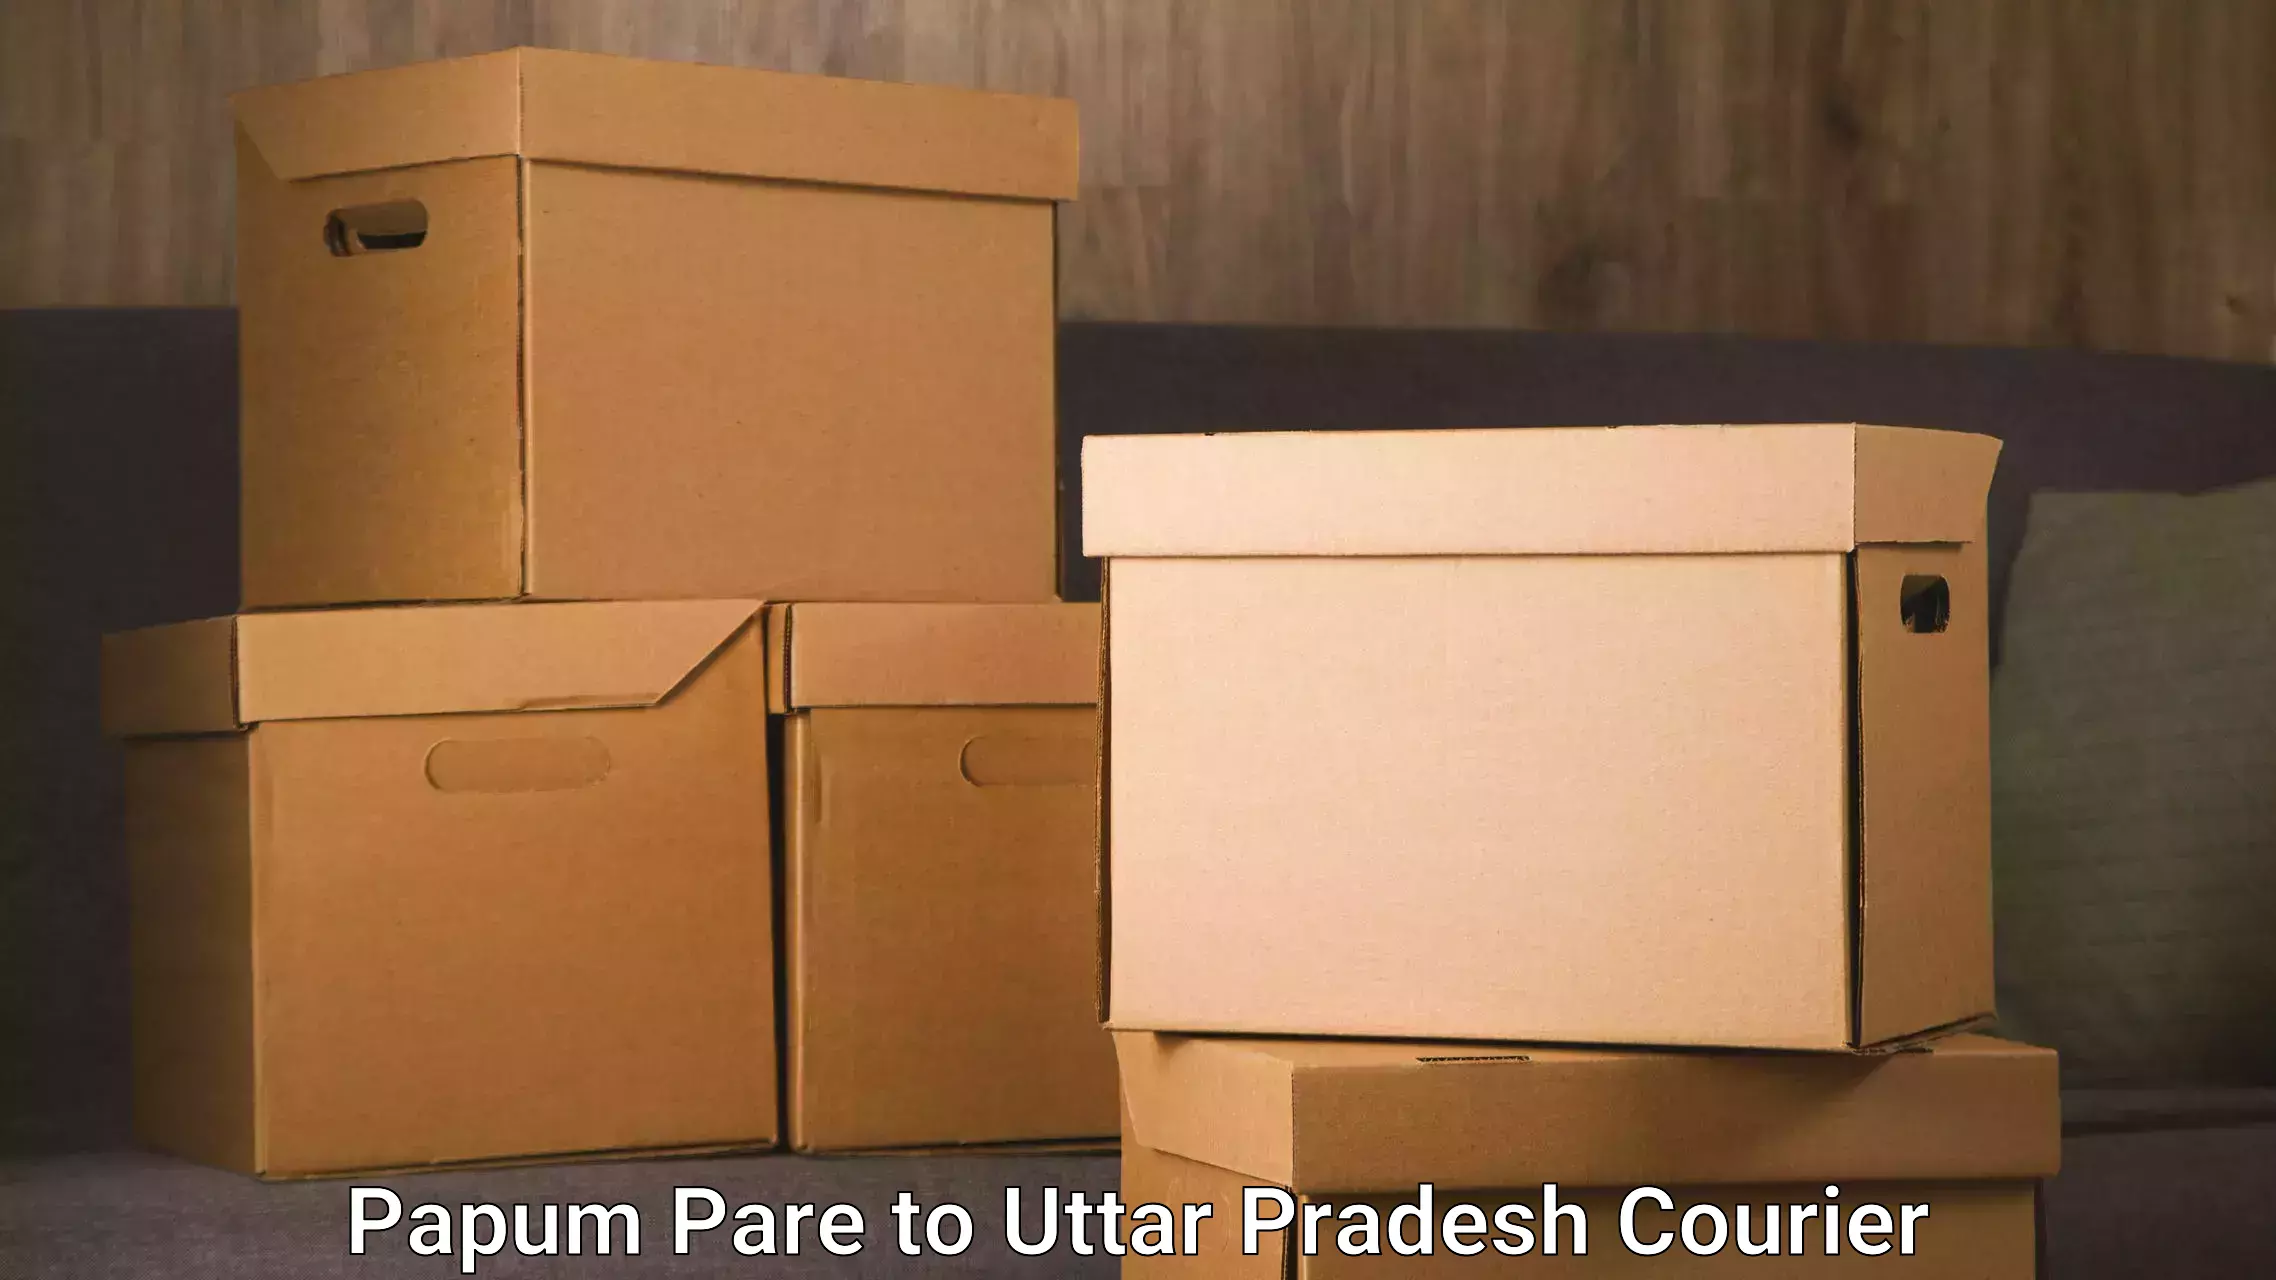 Efficient parcel tracking Papum Pare to Allahabad